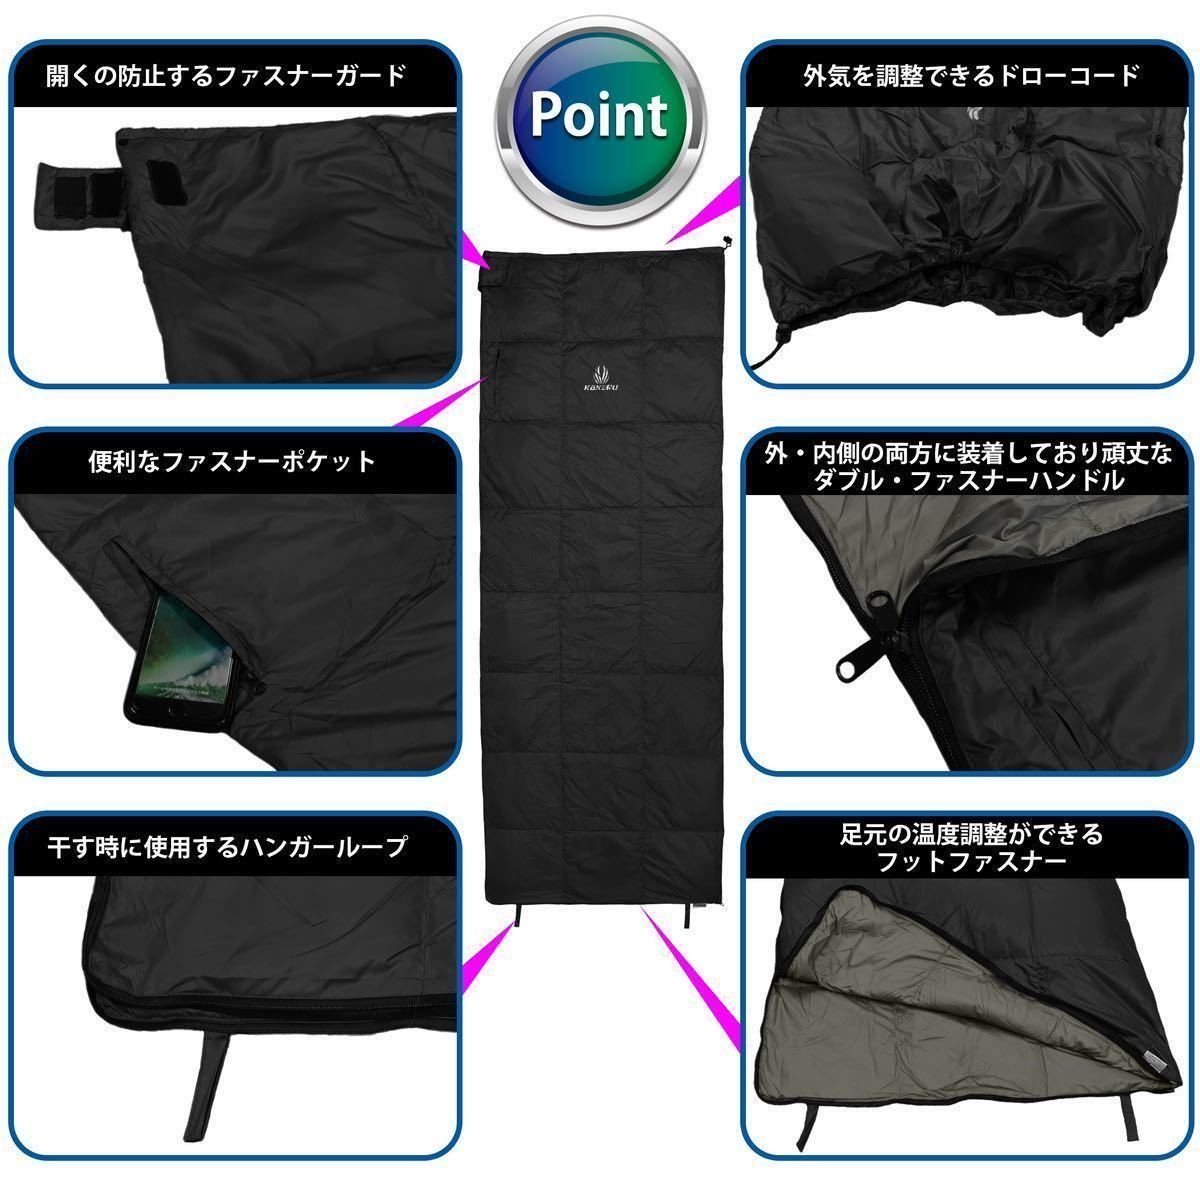 1 jpy ~[1 piece ] sleeping bag down sleeping bag envelope type compact feathers 850g new goods unused anonymity shipping 3 color from is possible to choose!